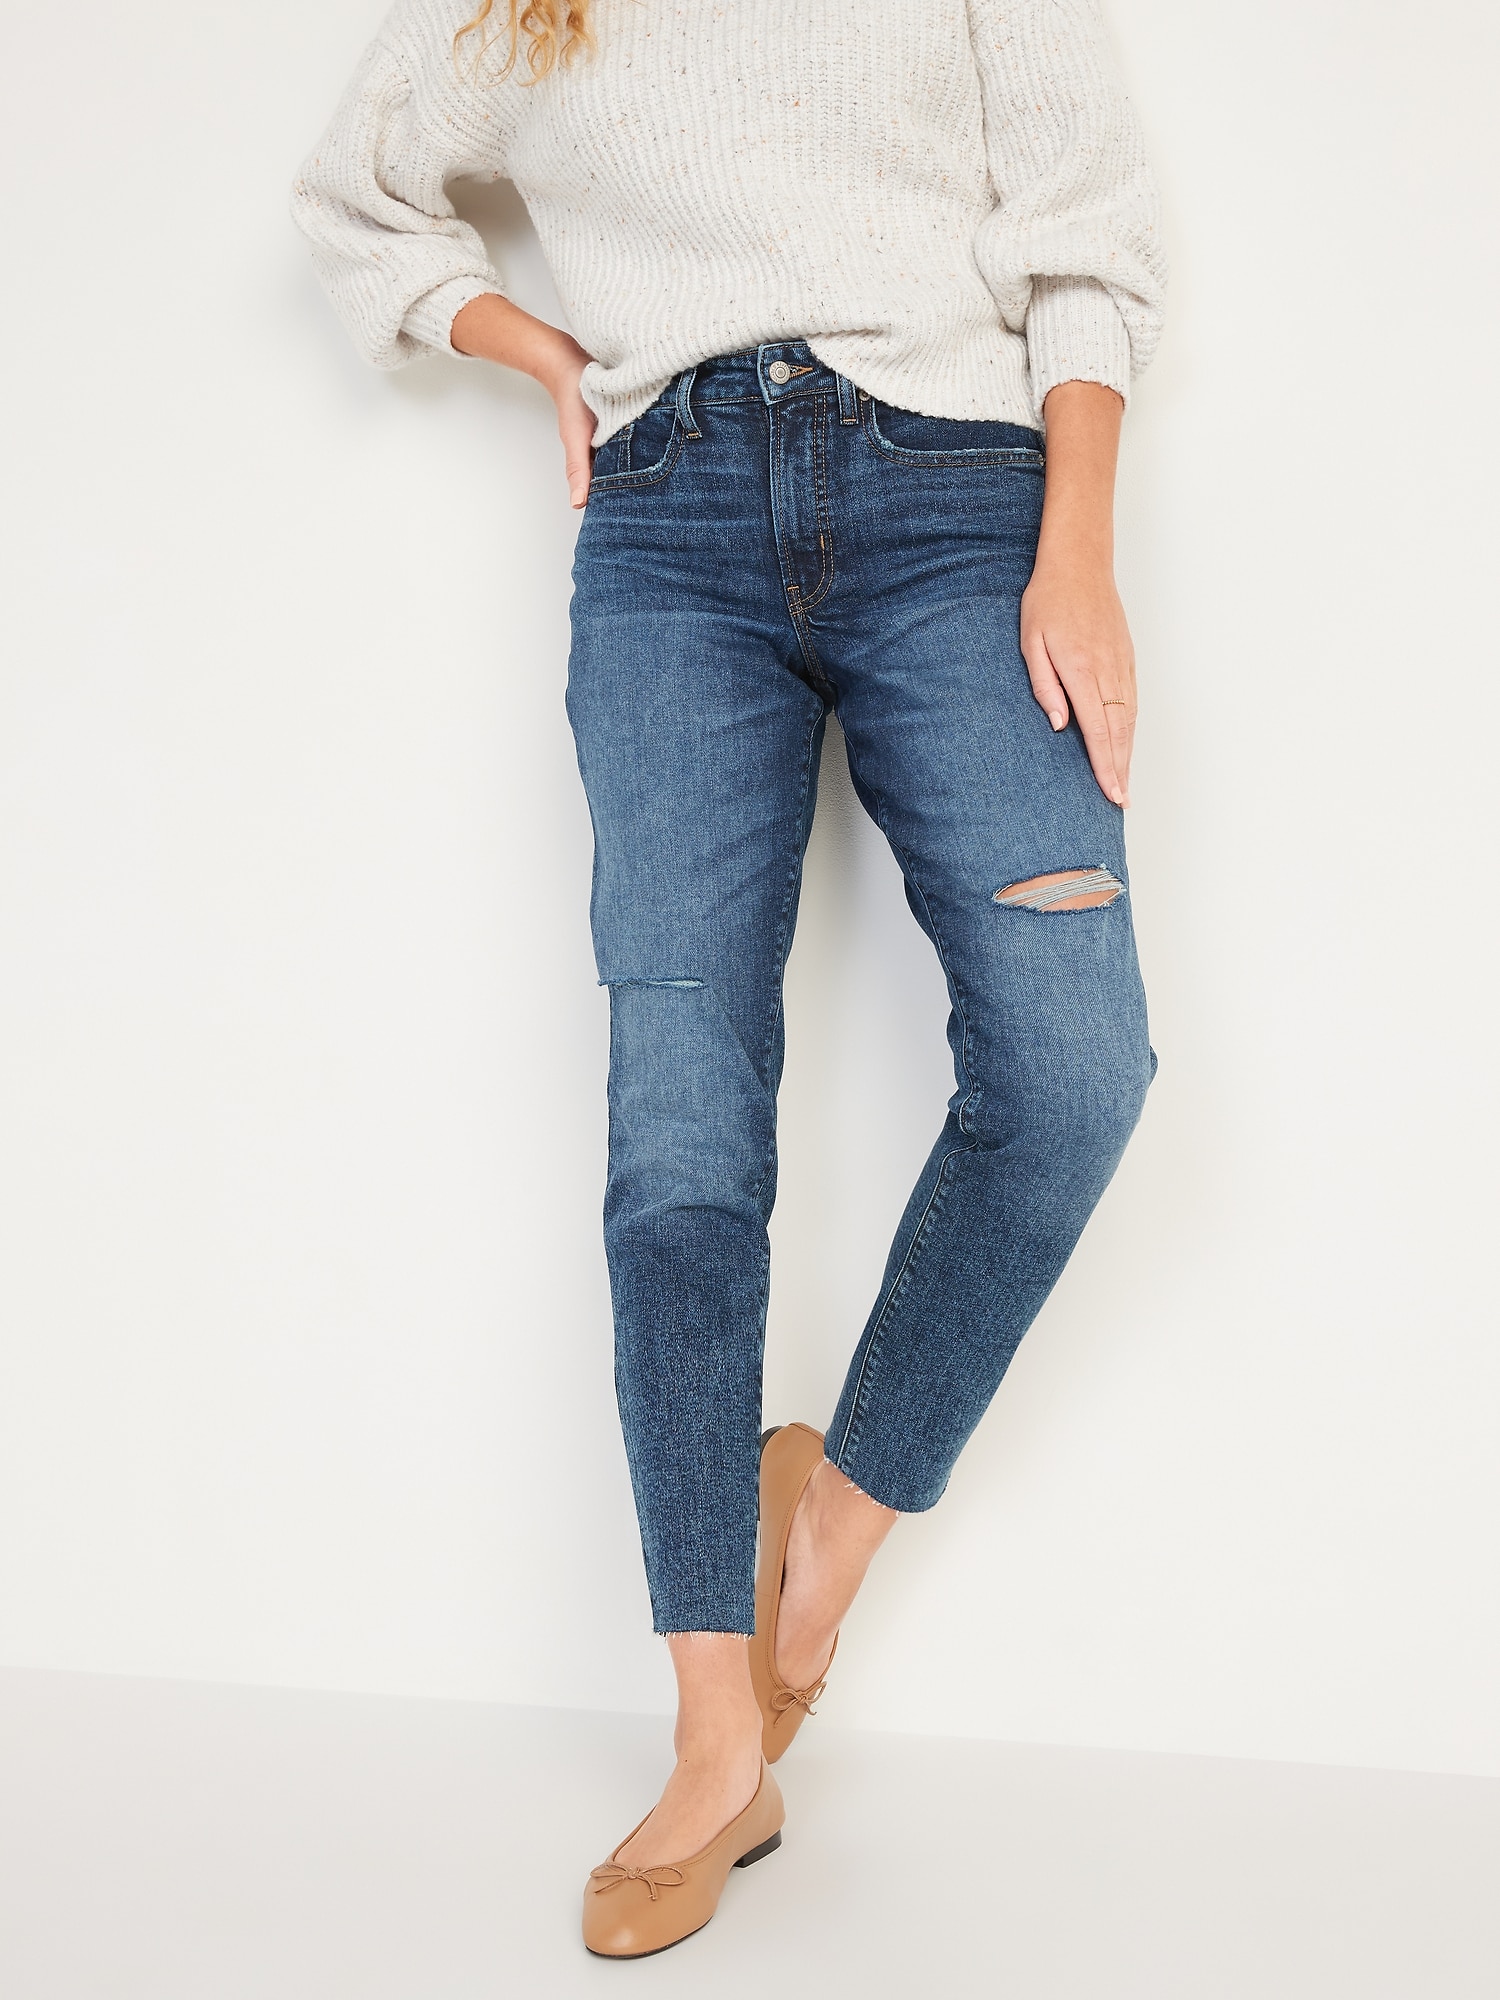 Curvy High-Waisted OG Straight Ripped Jeans for Women